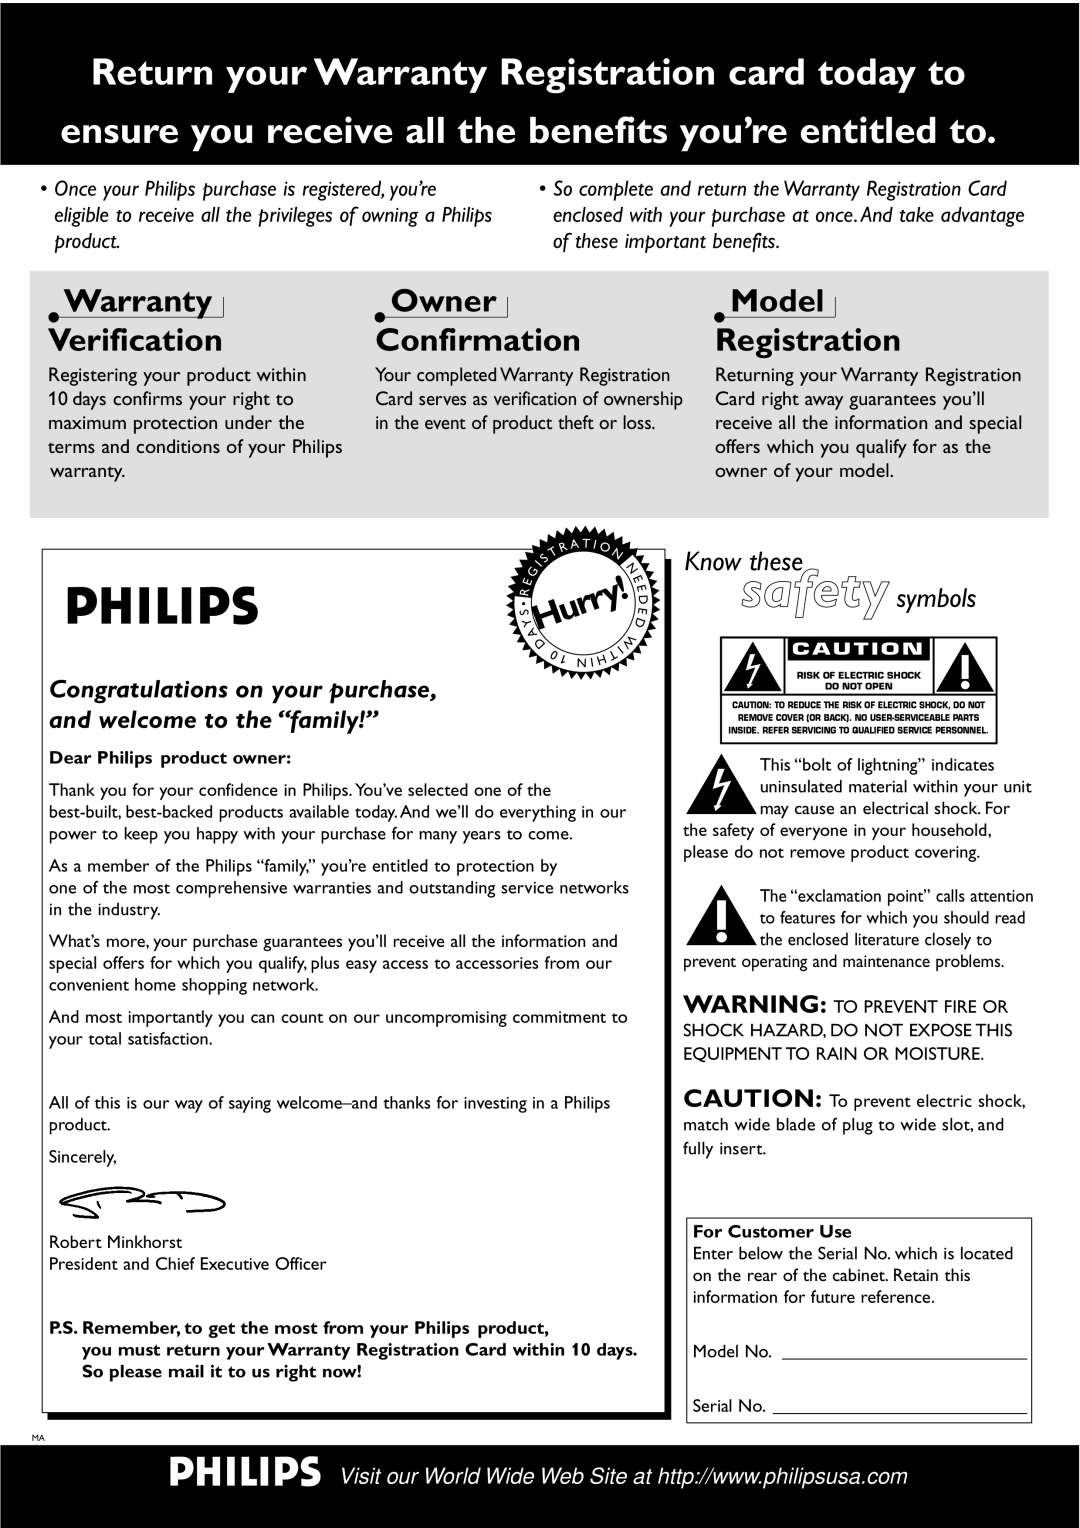 Philips DVD751 manual Warranty Verification, Owner Confirmation, Model Registration, Hurry, Know these safety symbols 